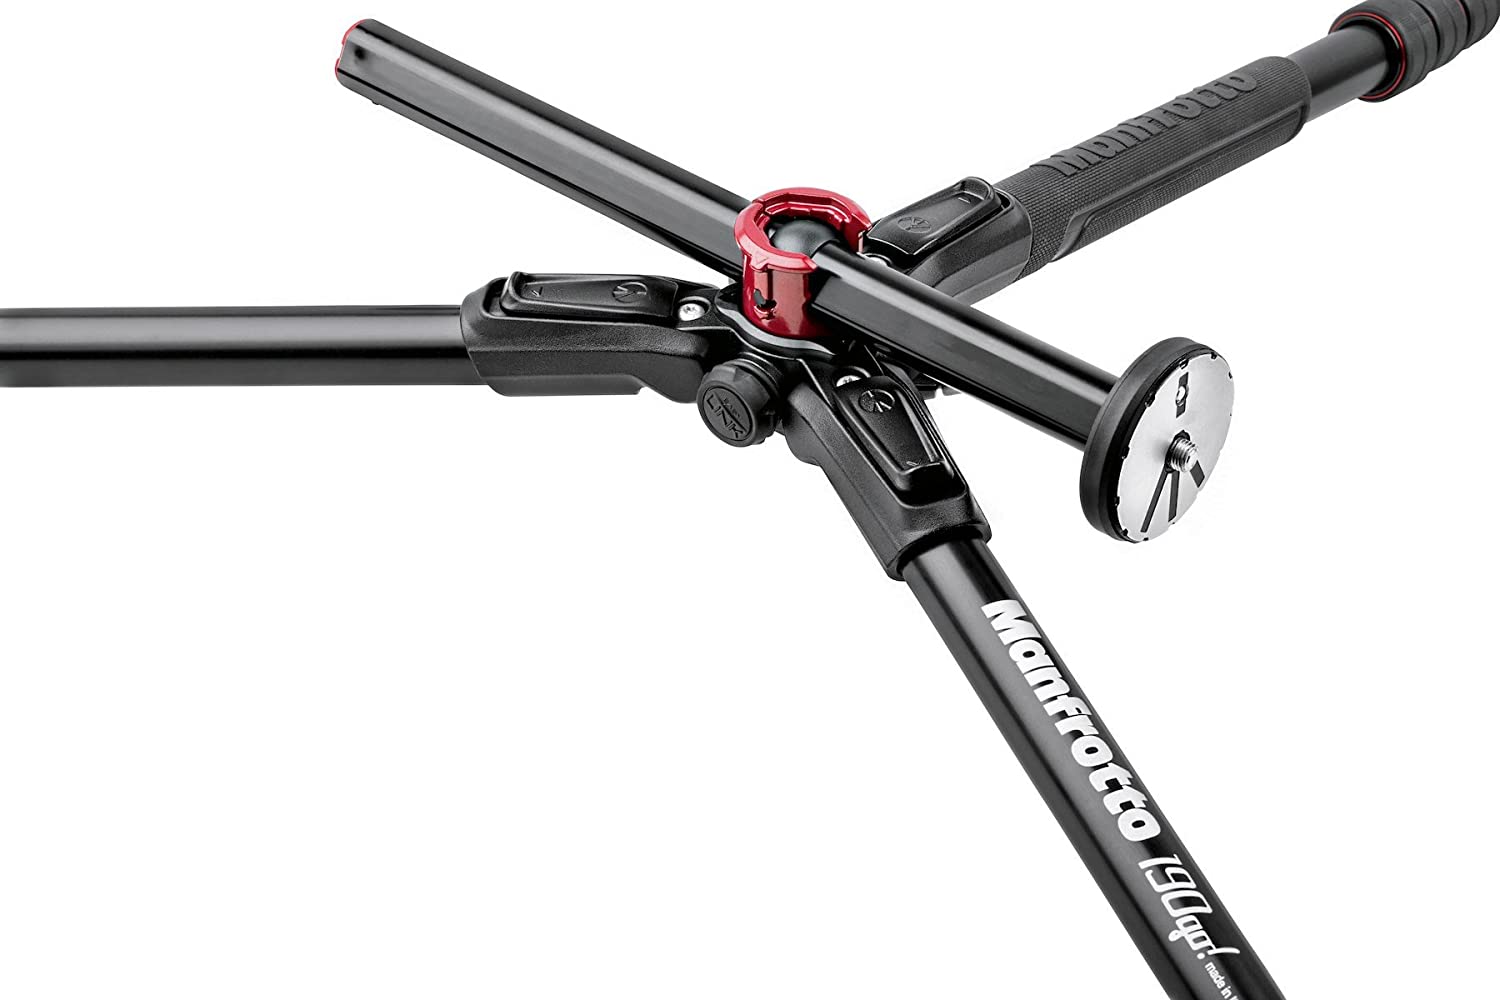 Manfrotto MK190goa4 MS Aluminum Tripod Kit 4-Section with XPRO 3-way Head